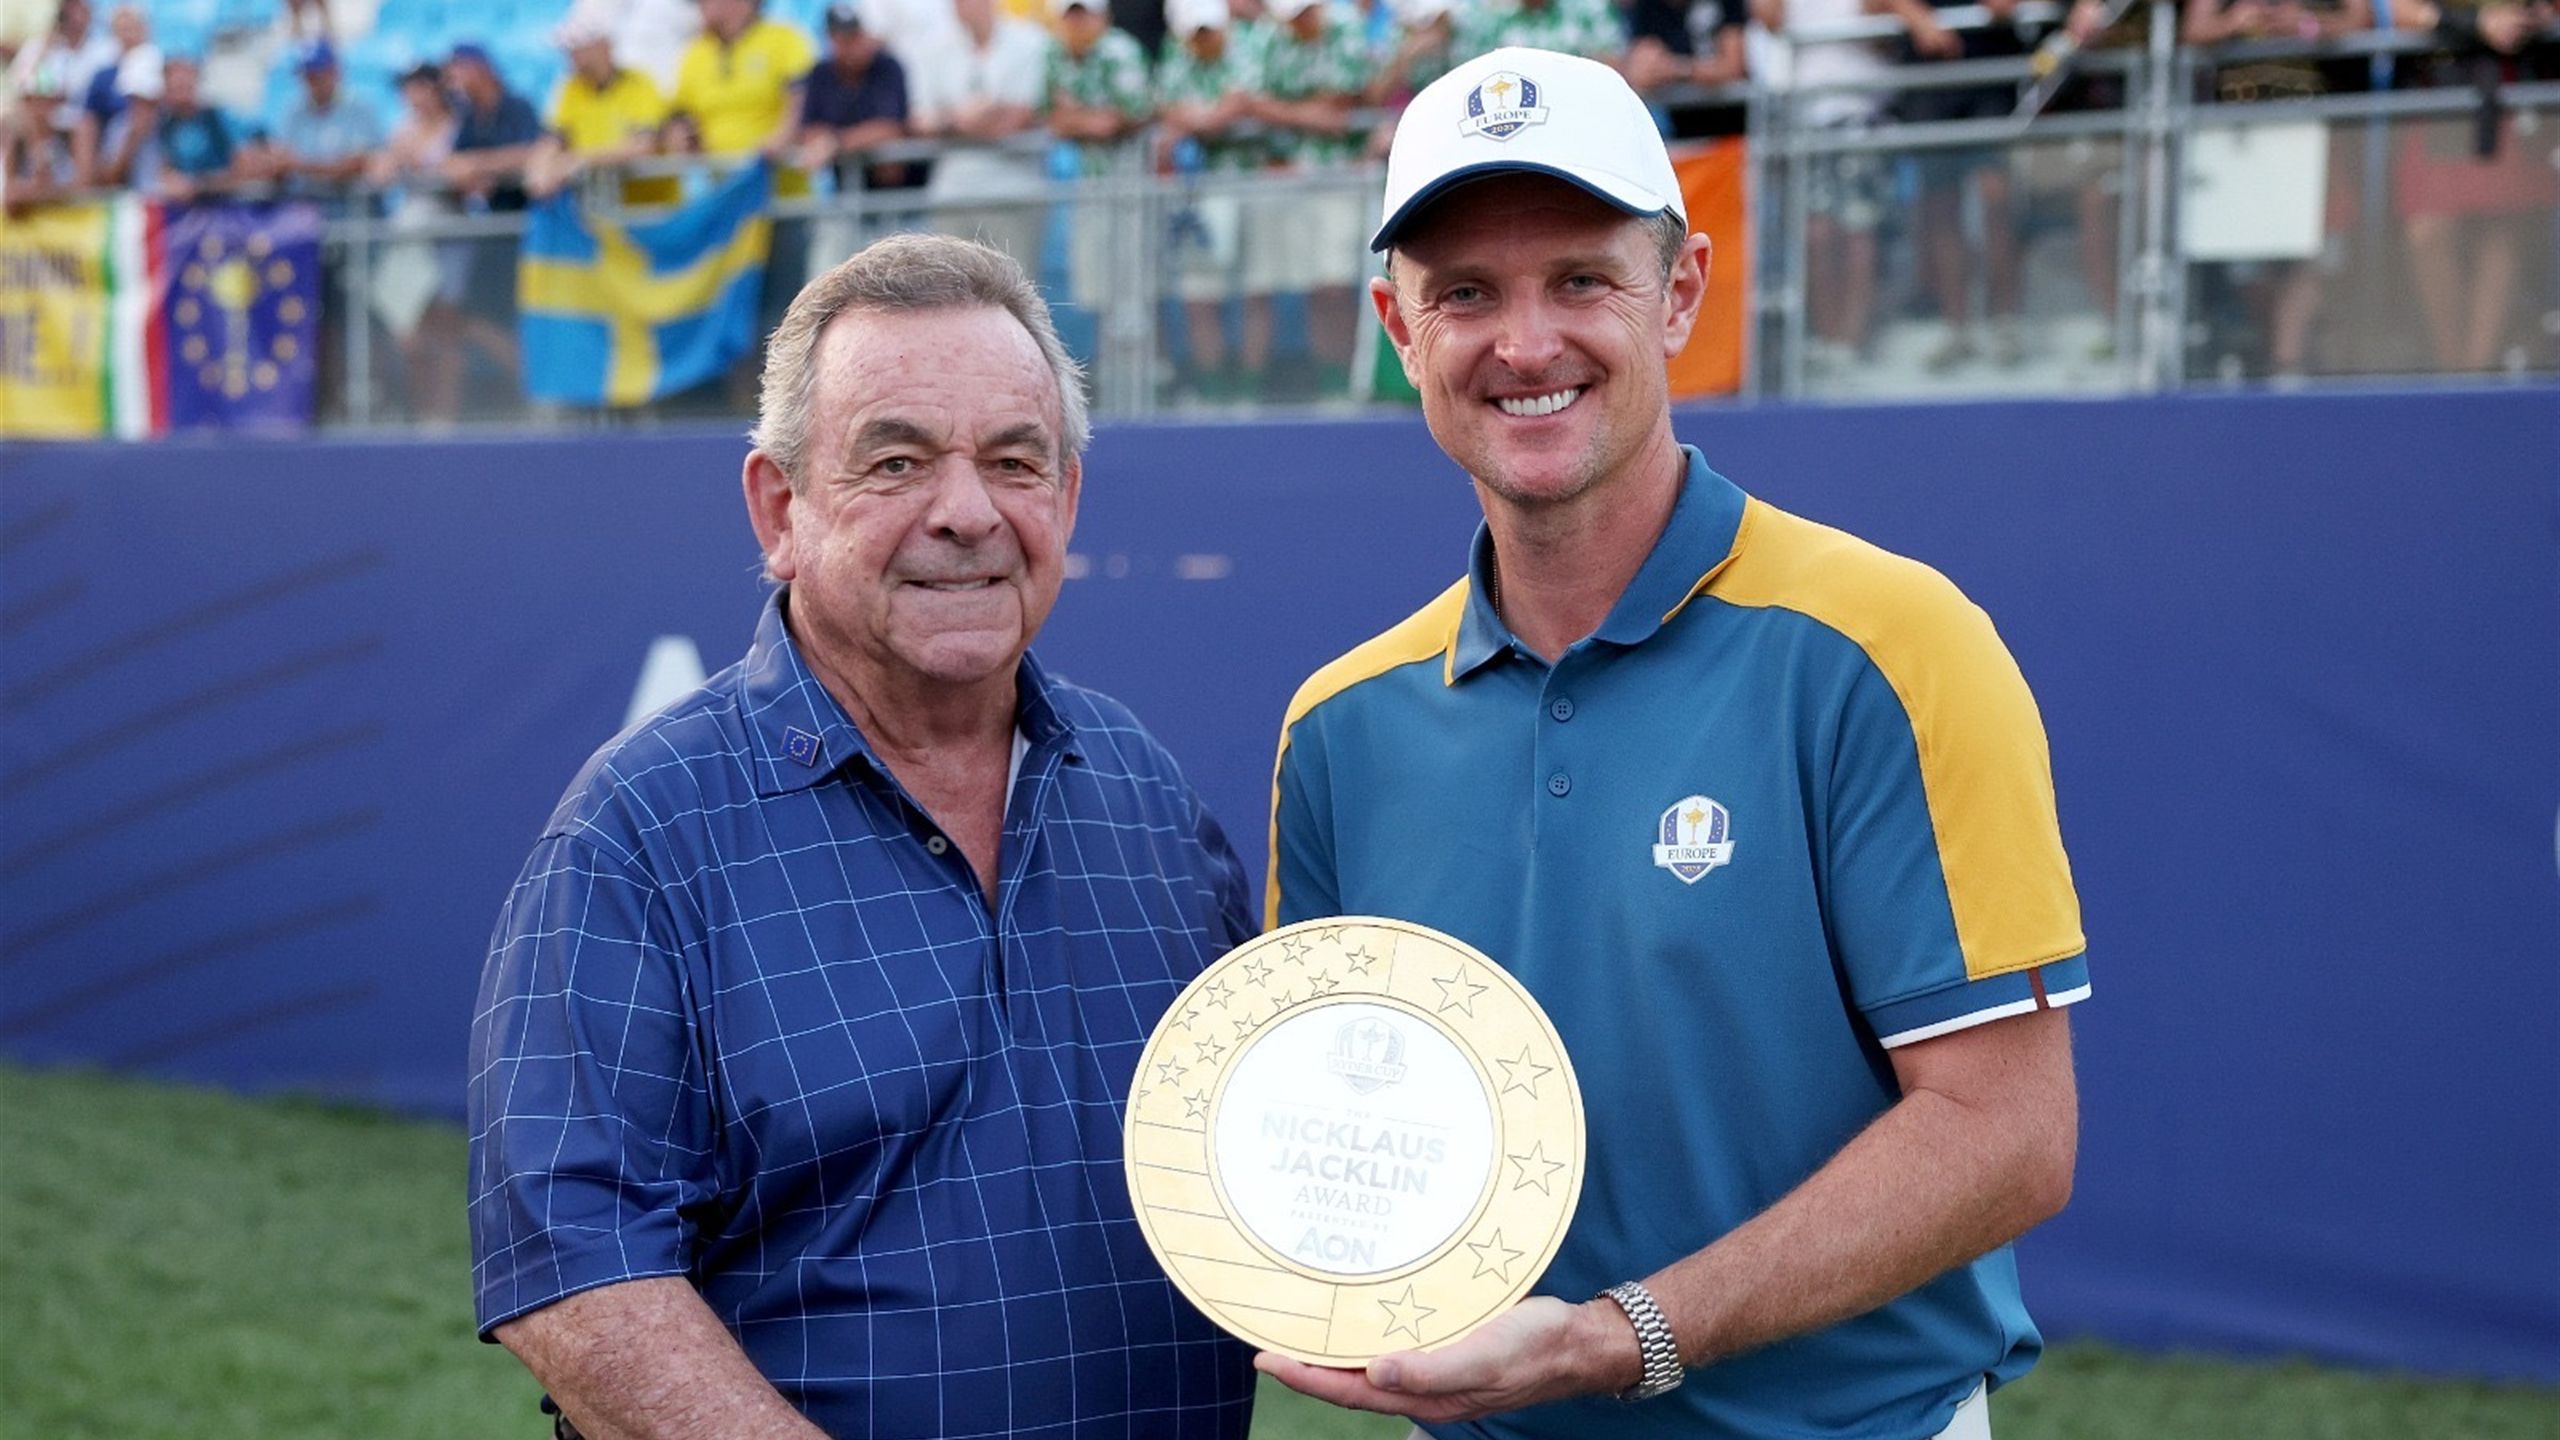 Ryder Cup |  Justin Rose wins the Nicklaus-Jacklin Award, the ultimate icon